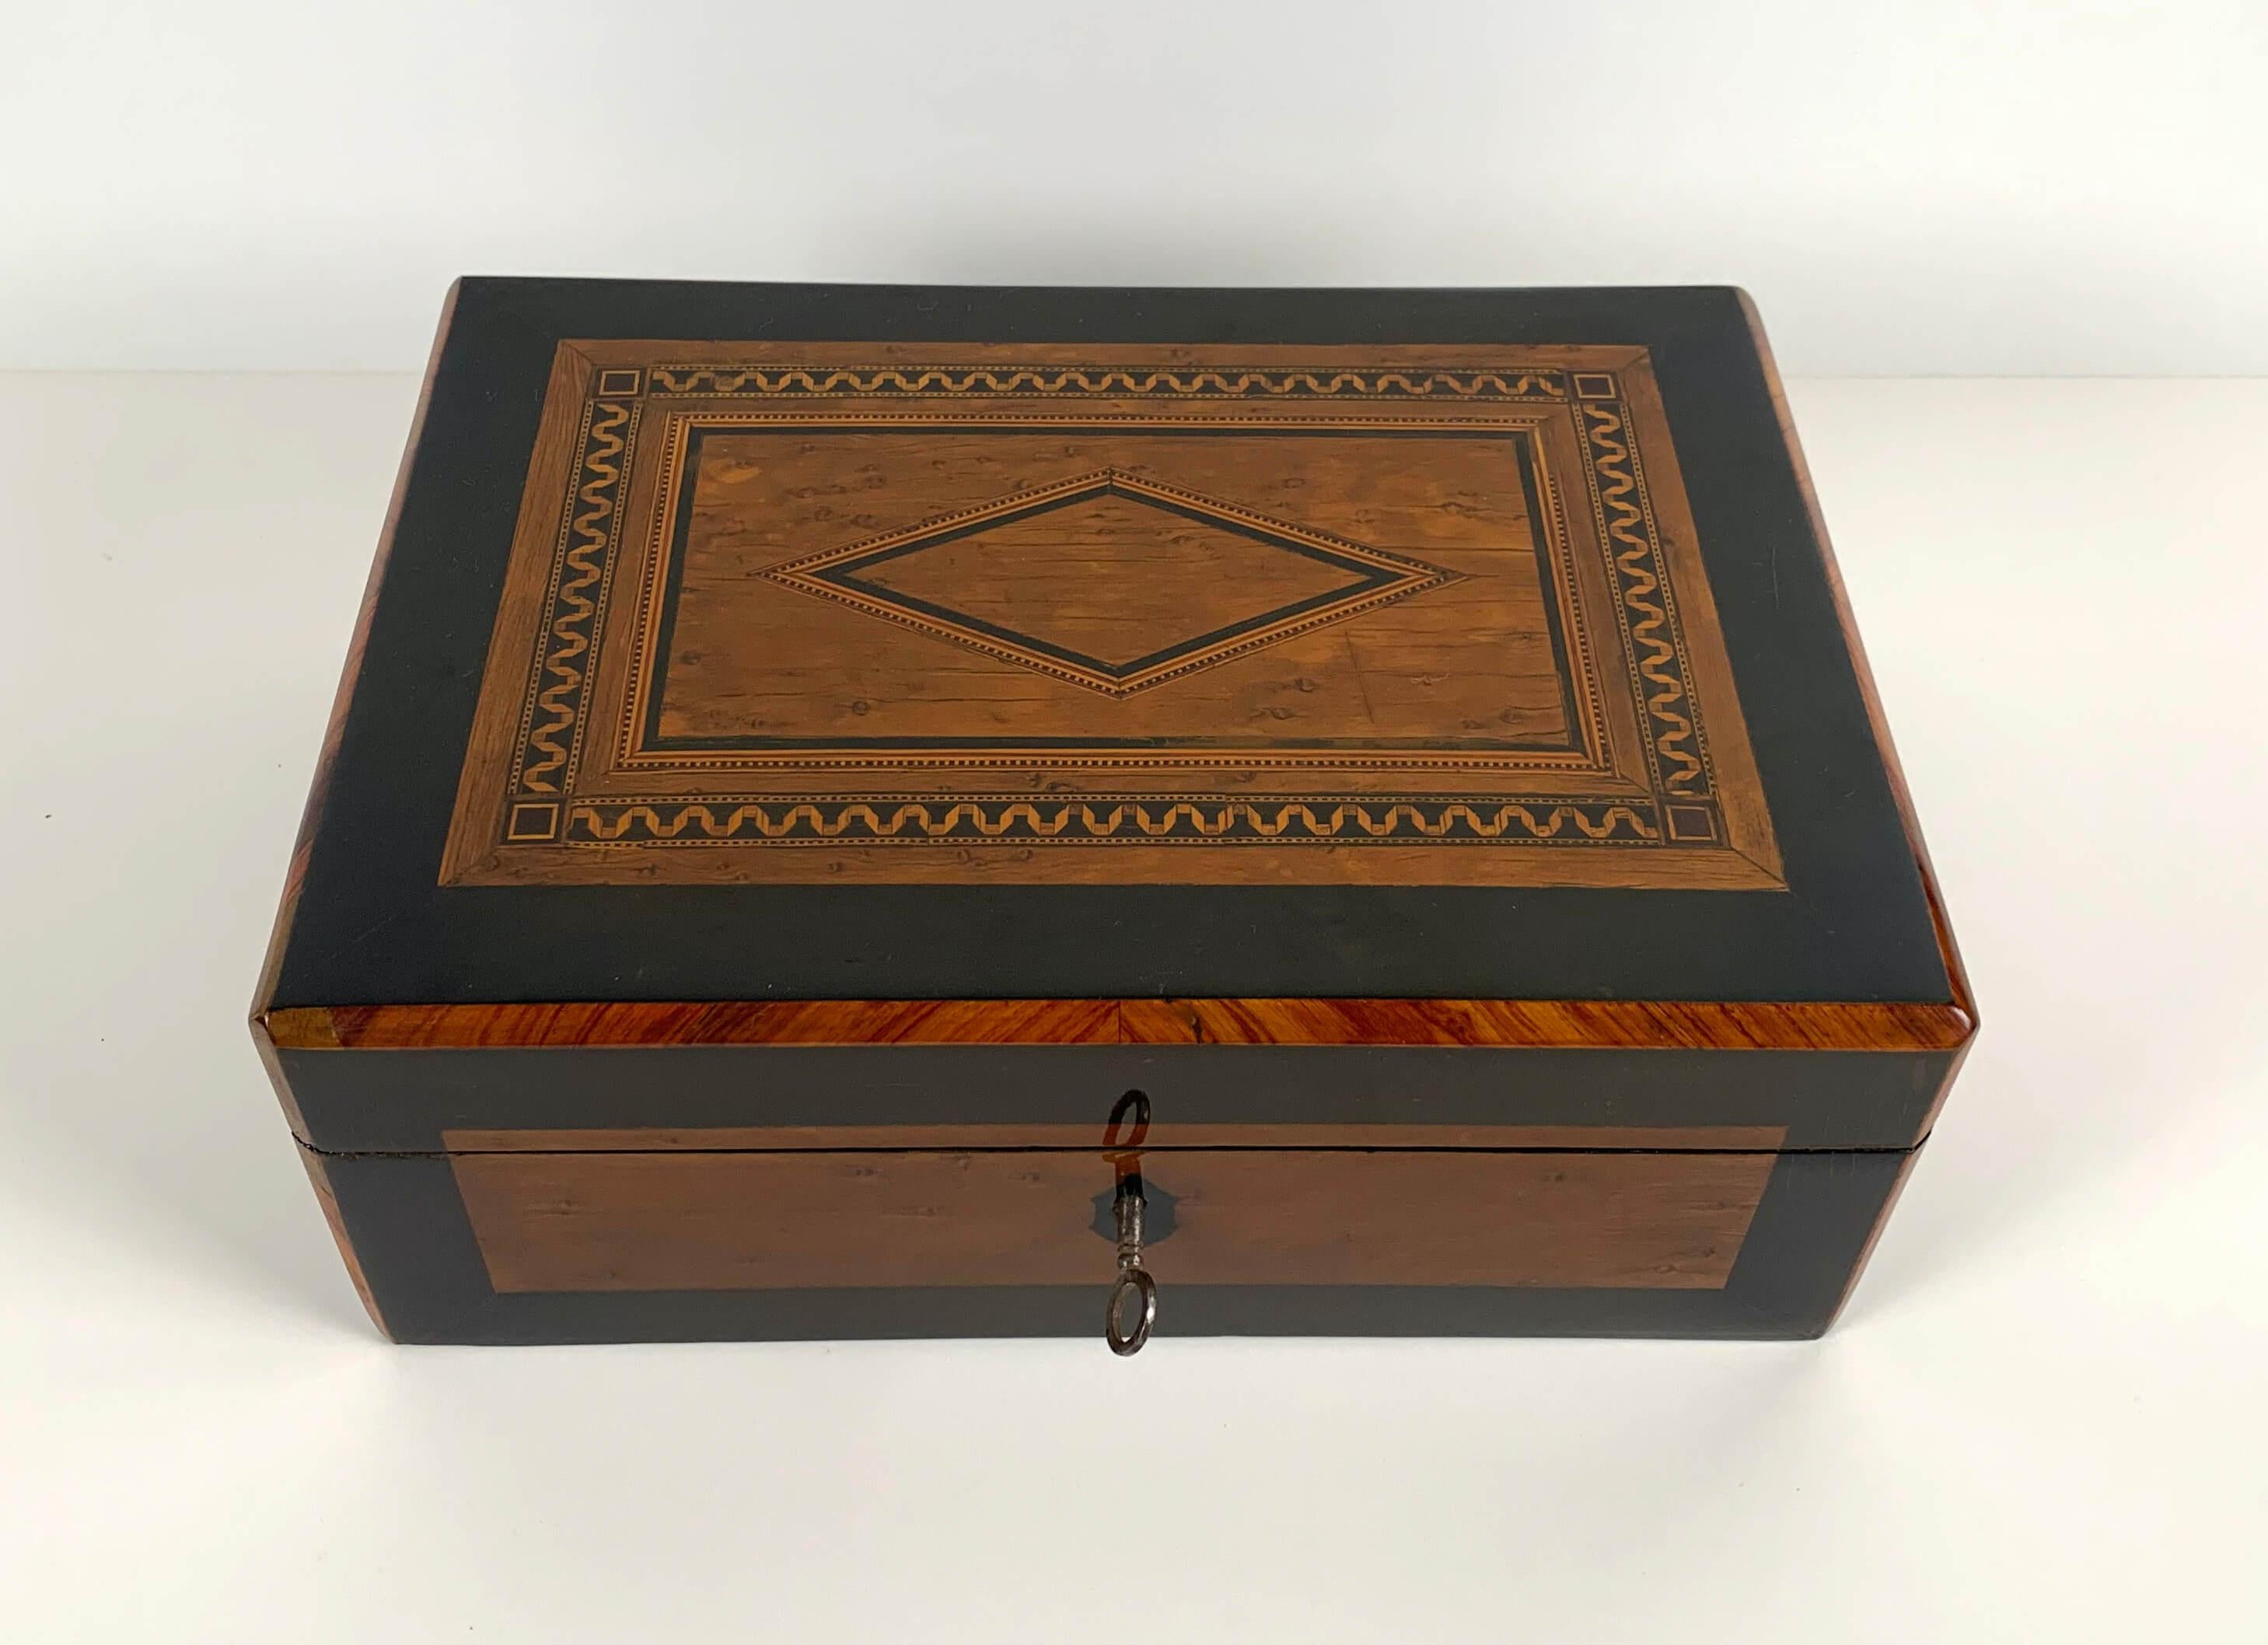 Restored neoclassical Biedermeier decorative box from Vienna/Austria, circa 1820.

Outside woods: Bird's eye maple with inlays in ebony and maple. Rosewood veneer around the corner.
Inside wood: Ash, blackened and mirror glass.
French polished